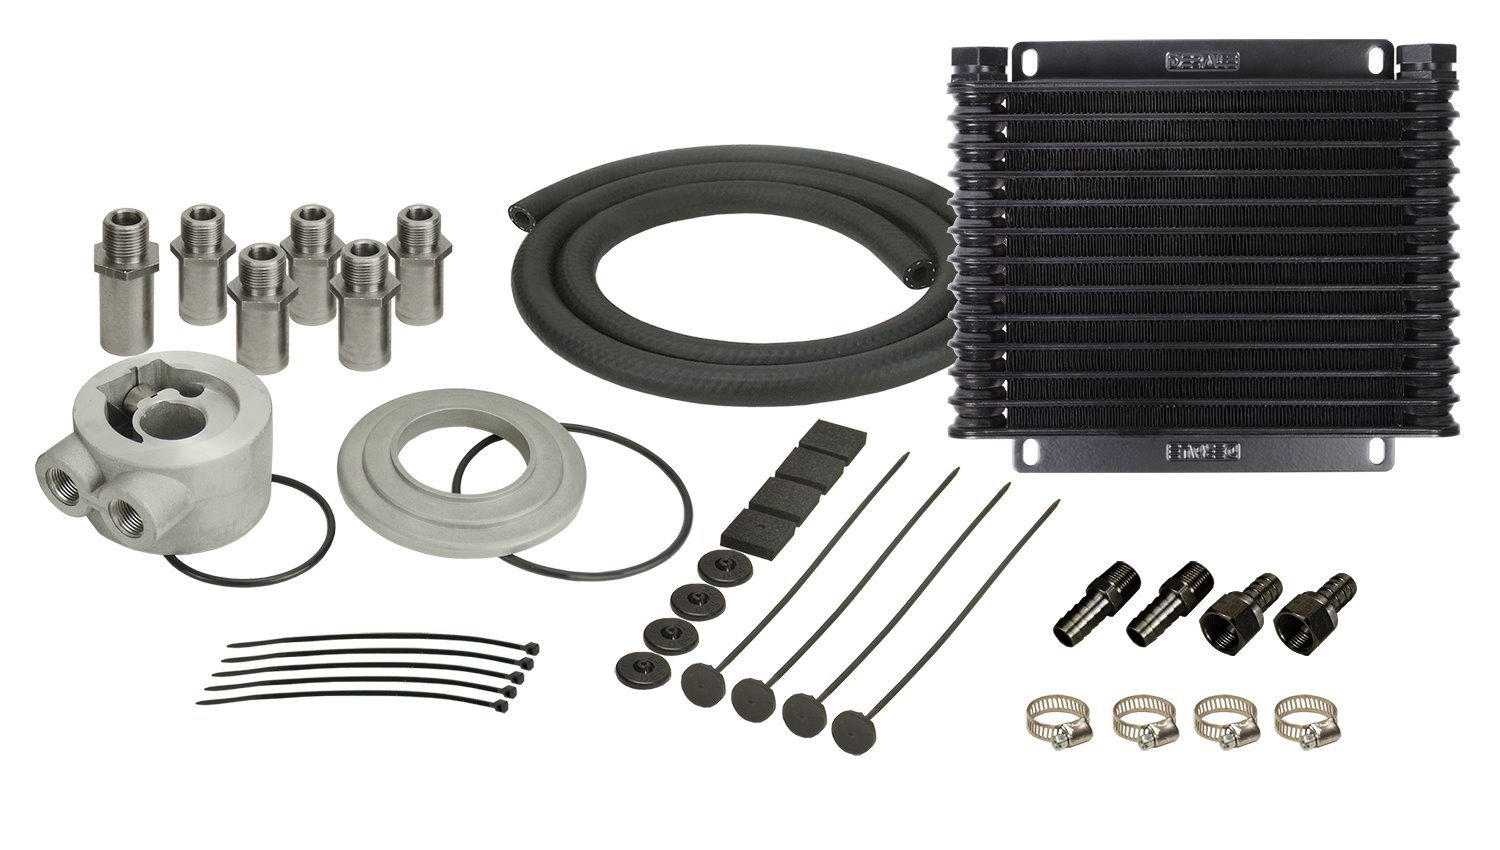 15405 13 Row Plate & Fin Engine Oil Cooler Kit with Sandwich